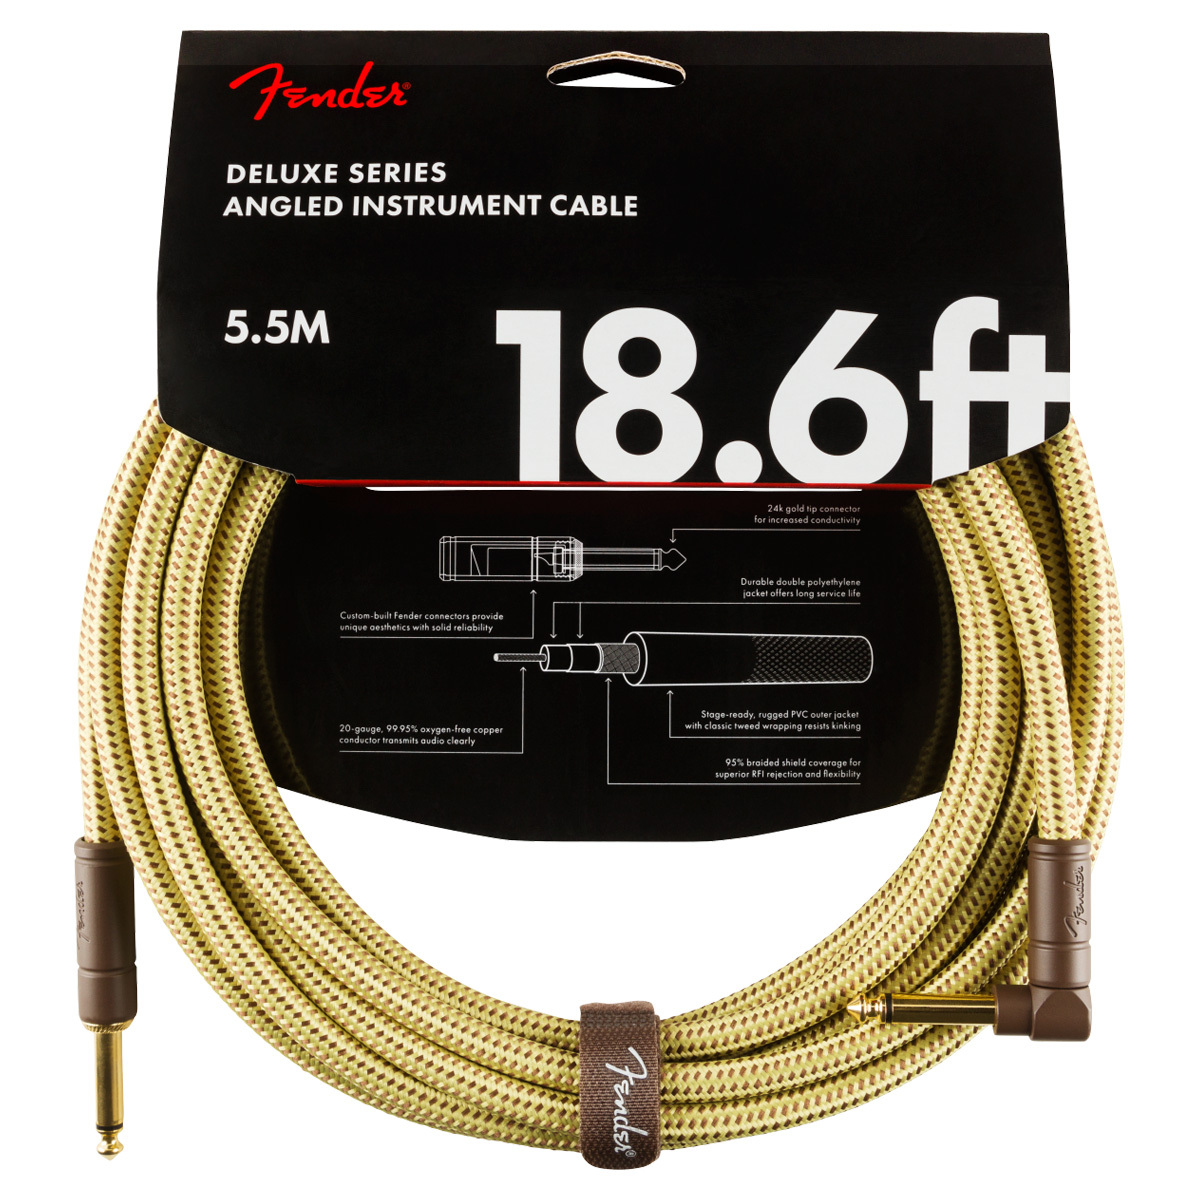 Fender Deluxe Series Tweed Instrument Cable ANG ギターケーブルシールド  約5.5m【WEBSHOP】（新品）【楽器検索デジマート】